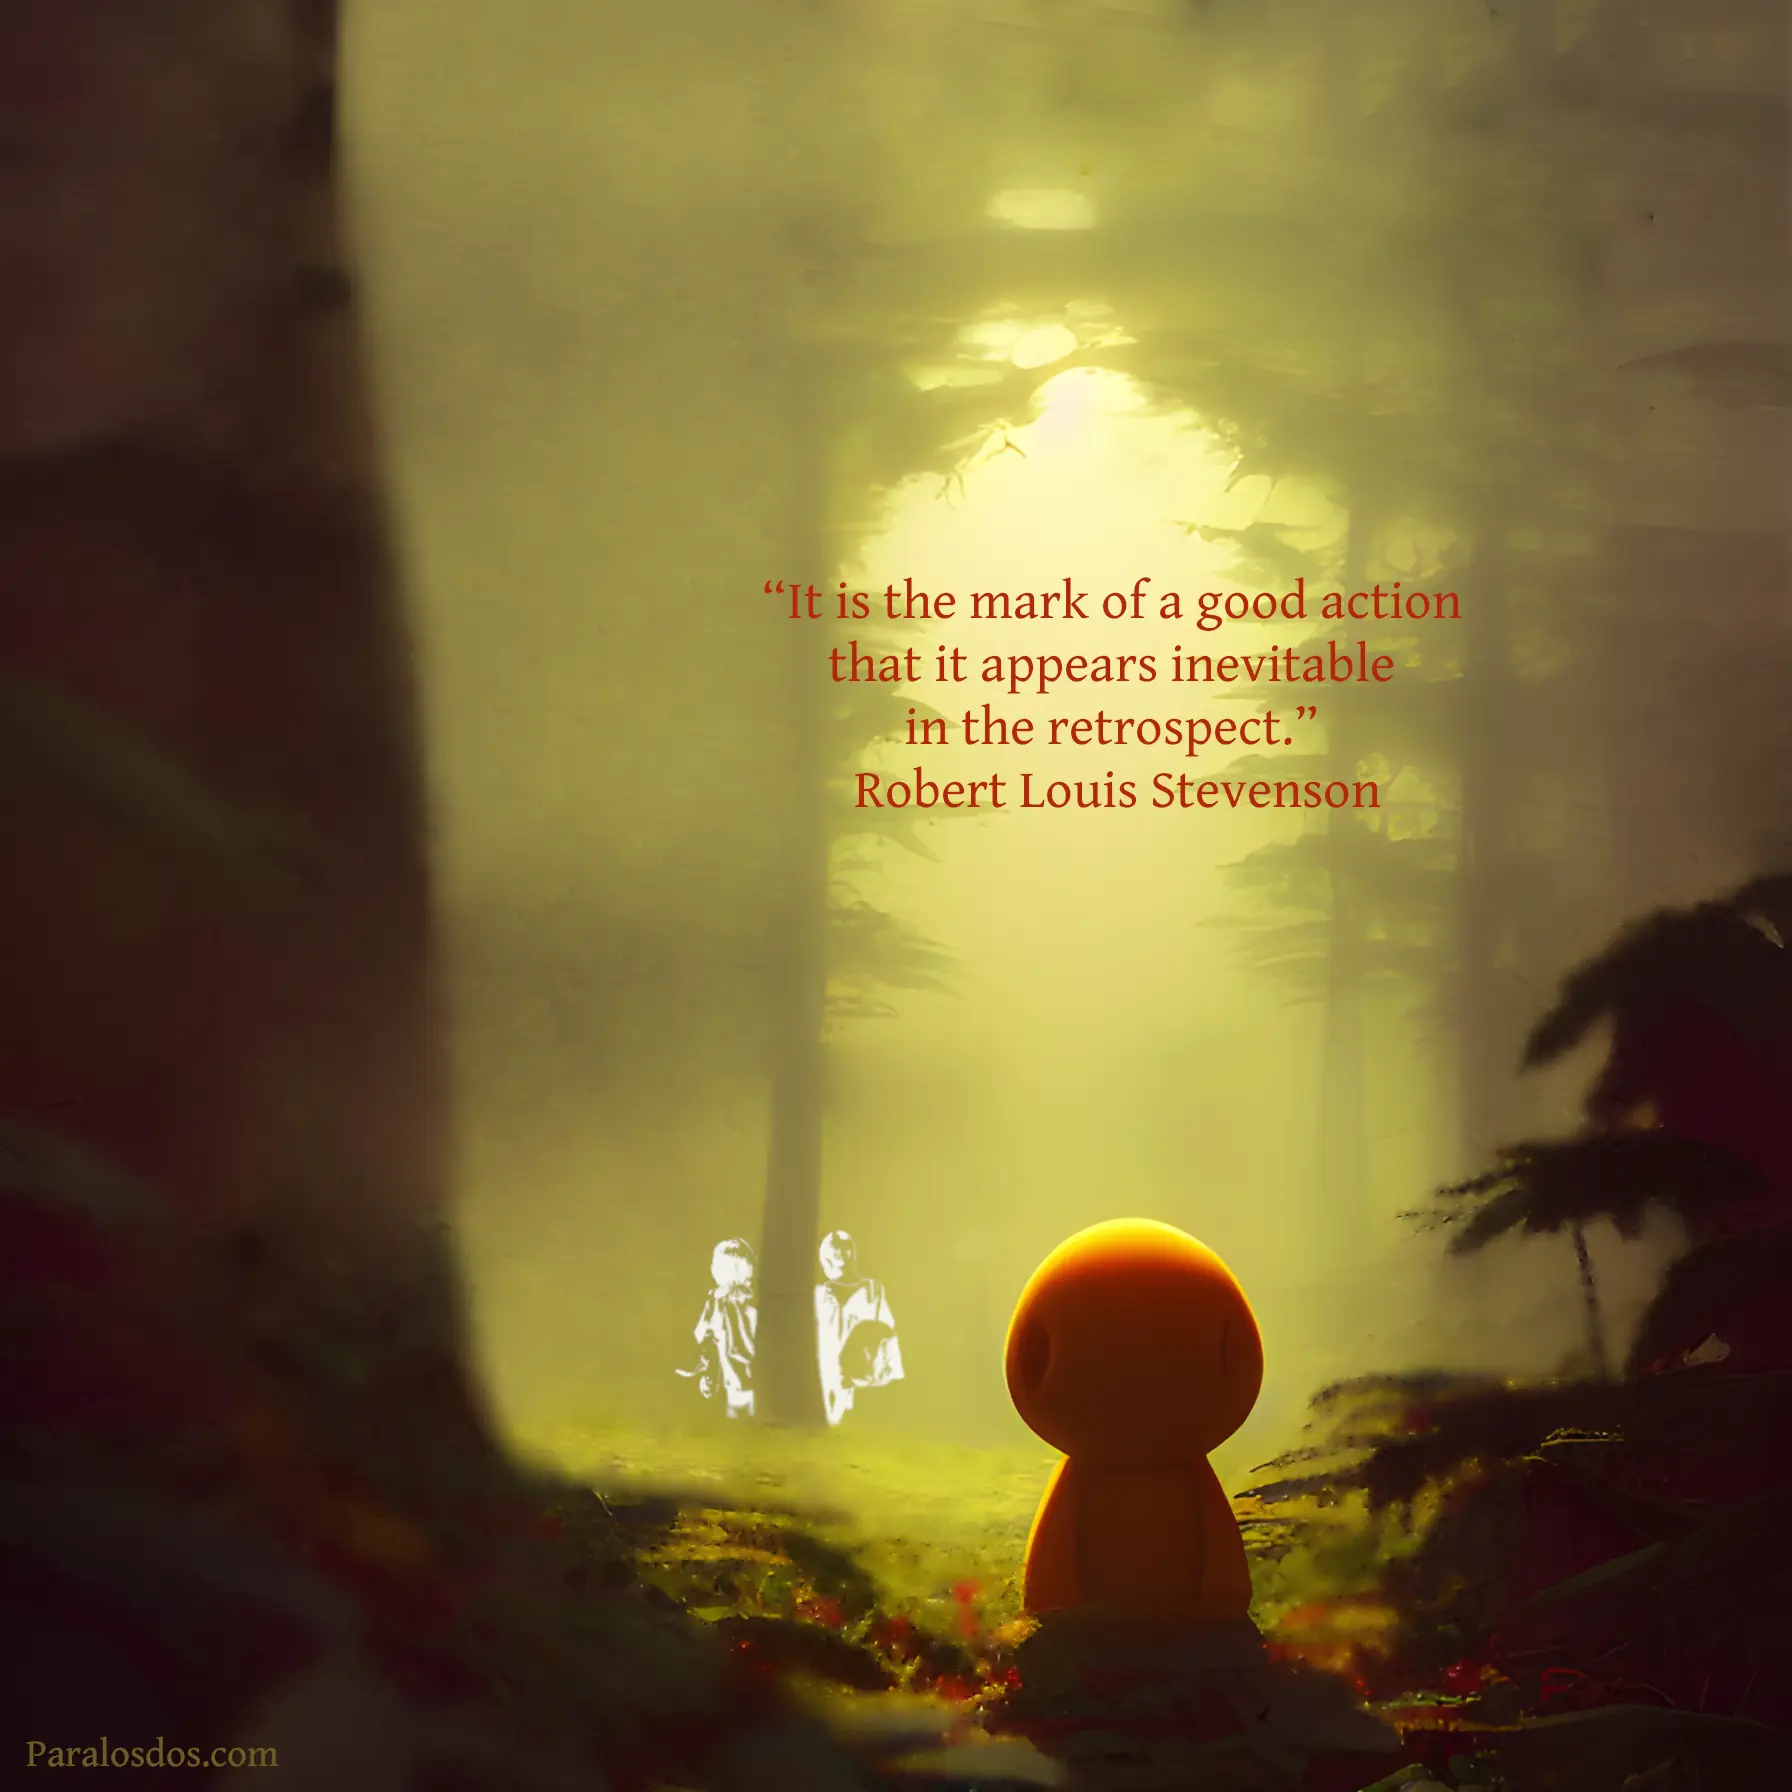 An artistic rendering of a figure waiting to walk into the light from out of a woods. The quote reads: “It is the mark of a good action that it appears inevitable in the retrospect.” Robert Louis Stevenson